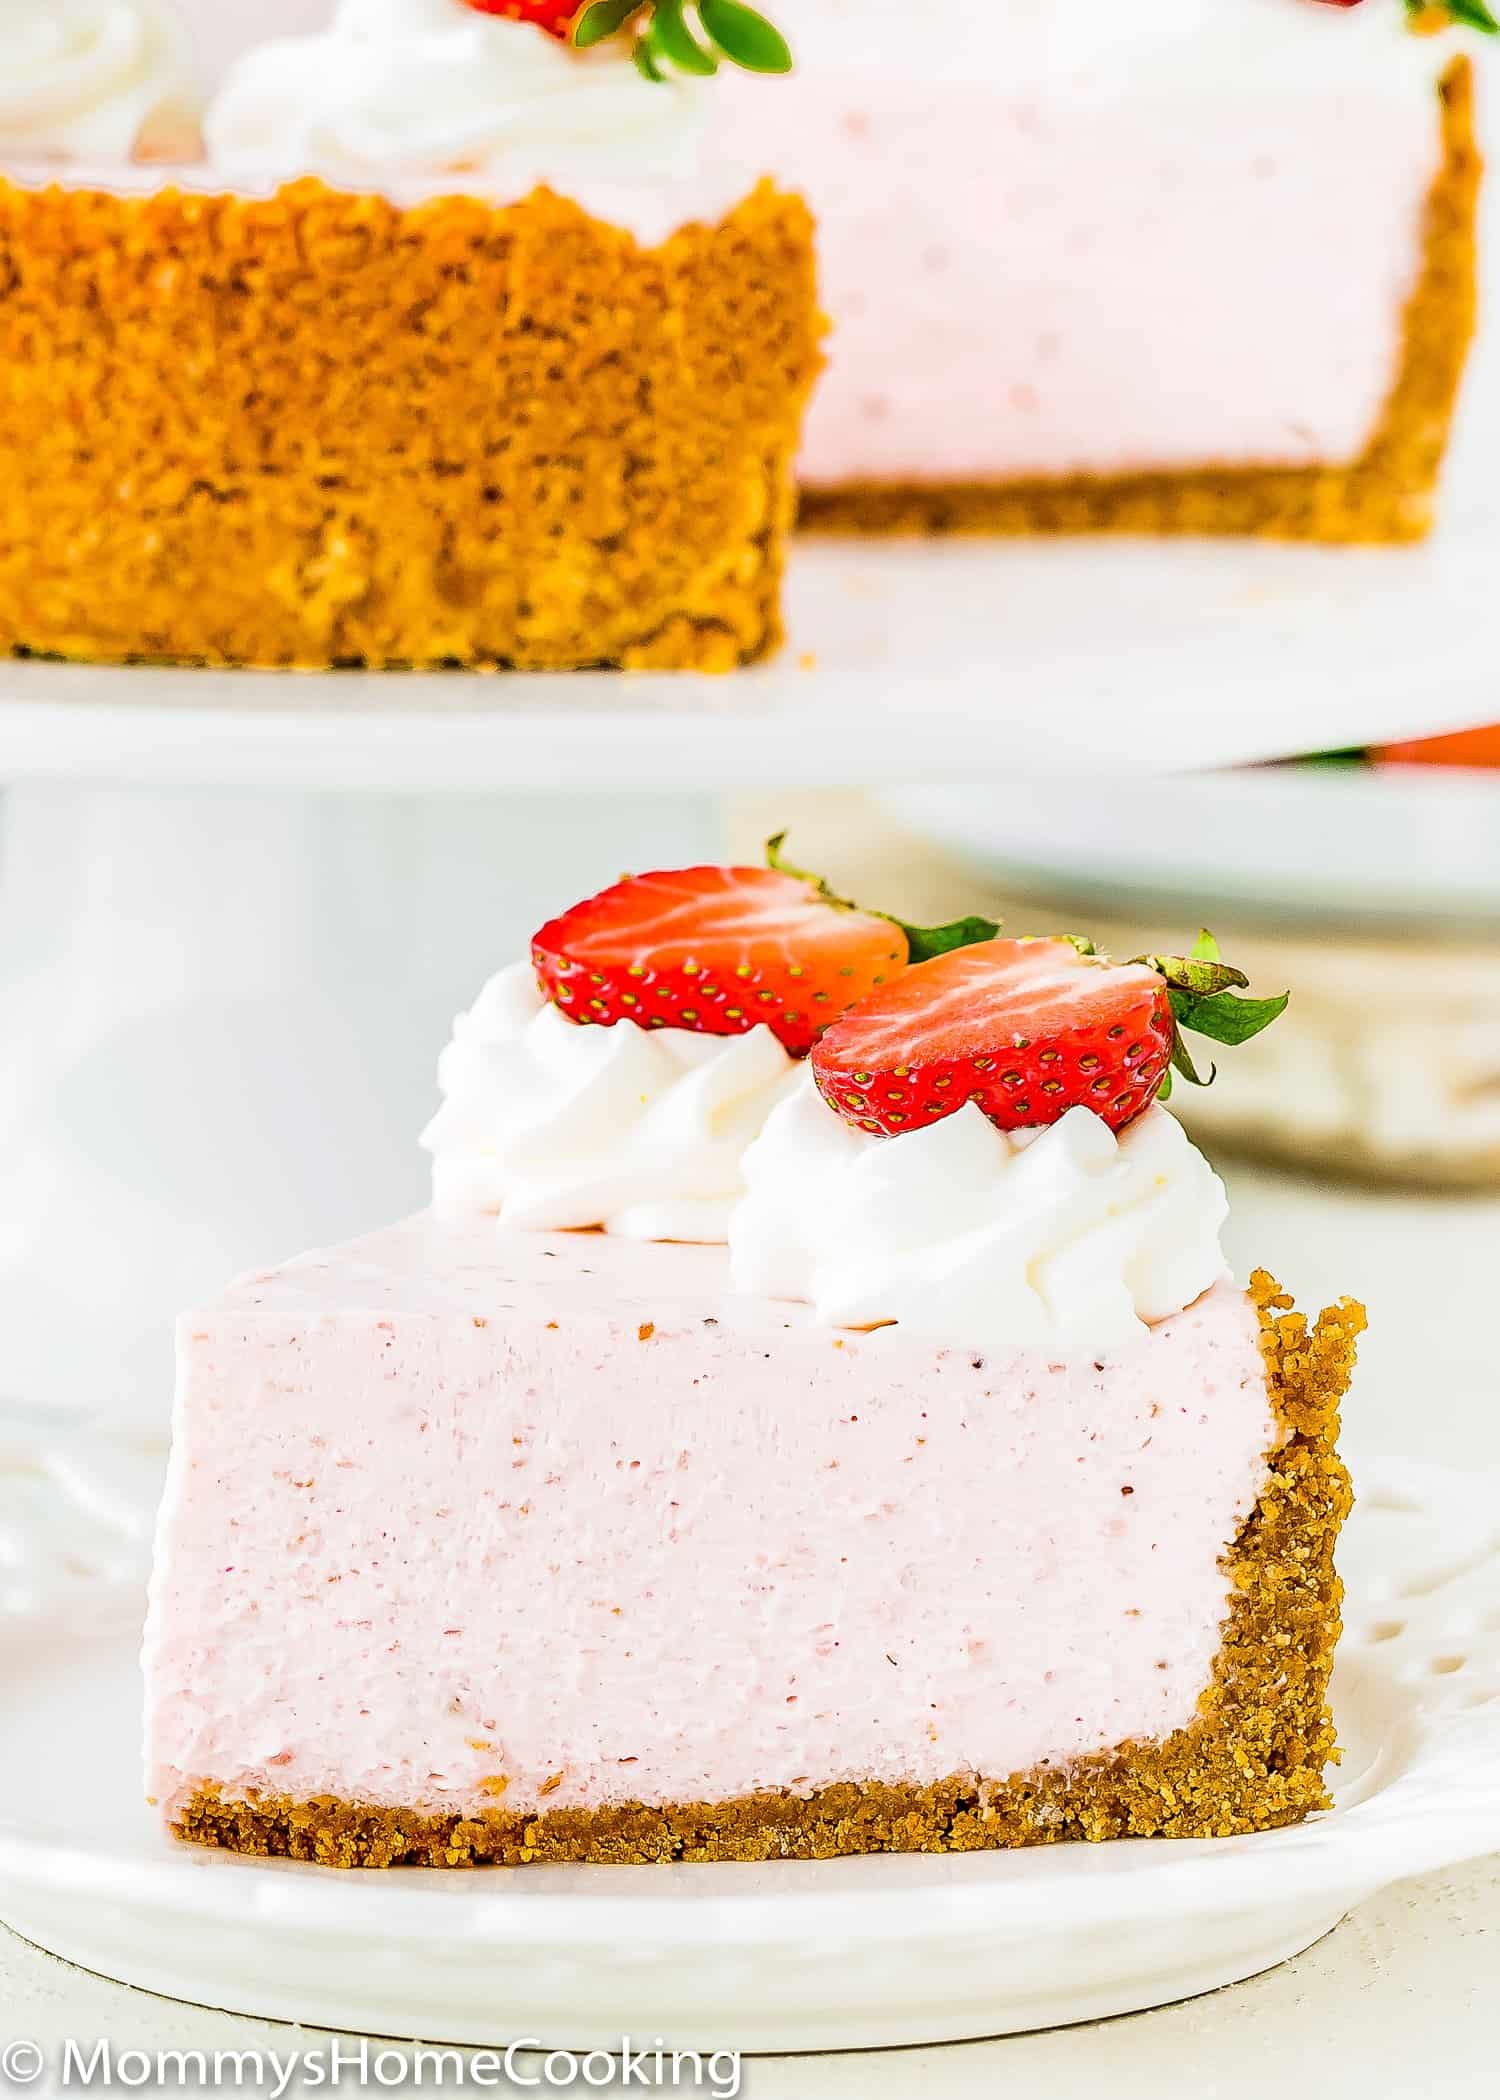 a slice of No-Bake Strawberry Cheesecake with fresh strawberries and whipped cream on top.